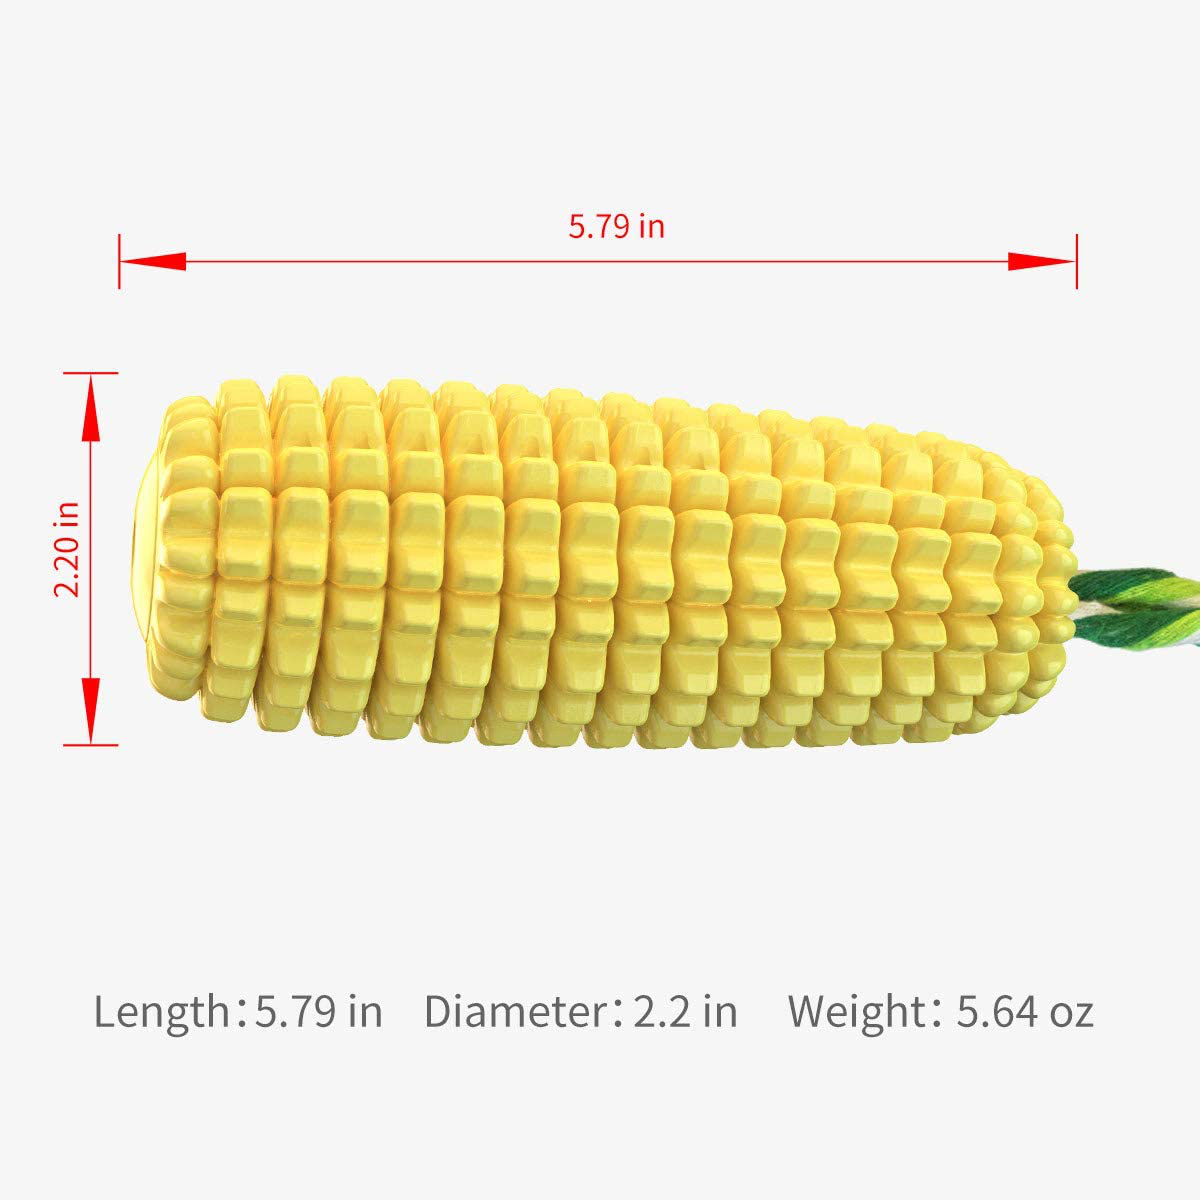 Dog Chew Toys, Puppy Toothbrush Clean Teeth Interactive Corn Toys, Dog Toys Aggressive Chewers Small Meduium Large Breed